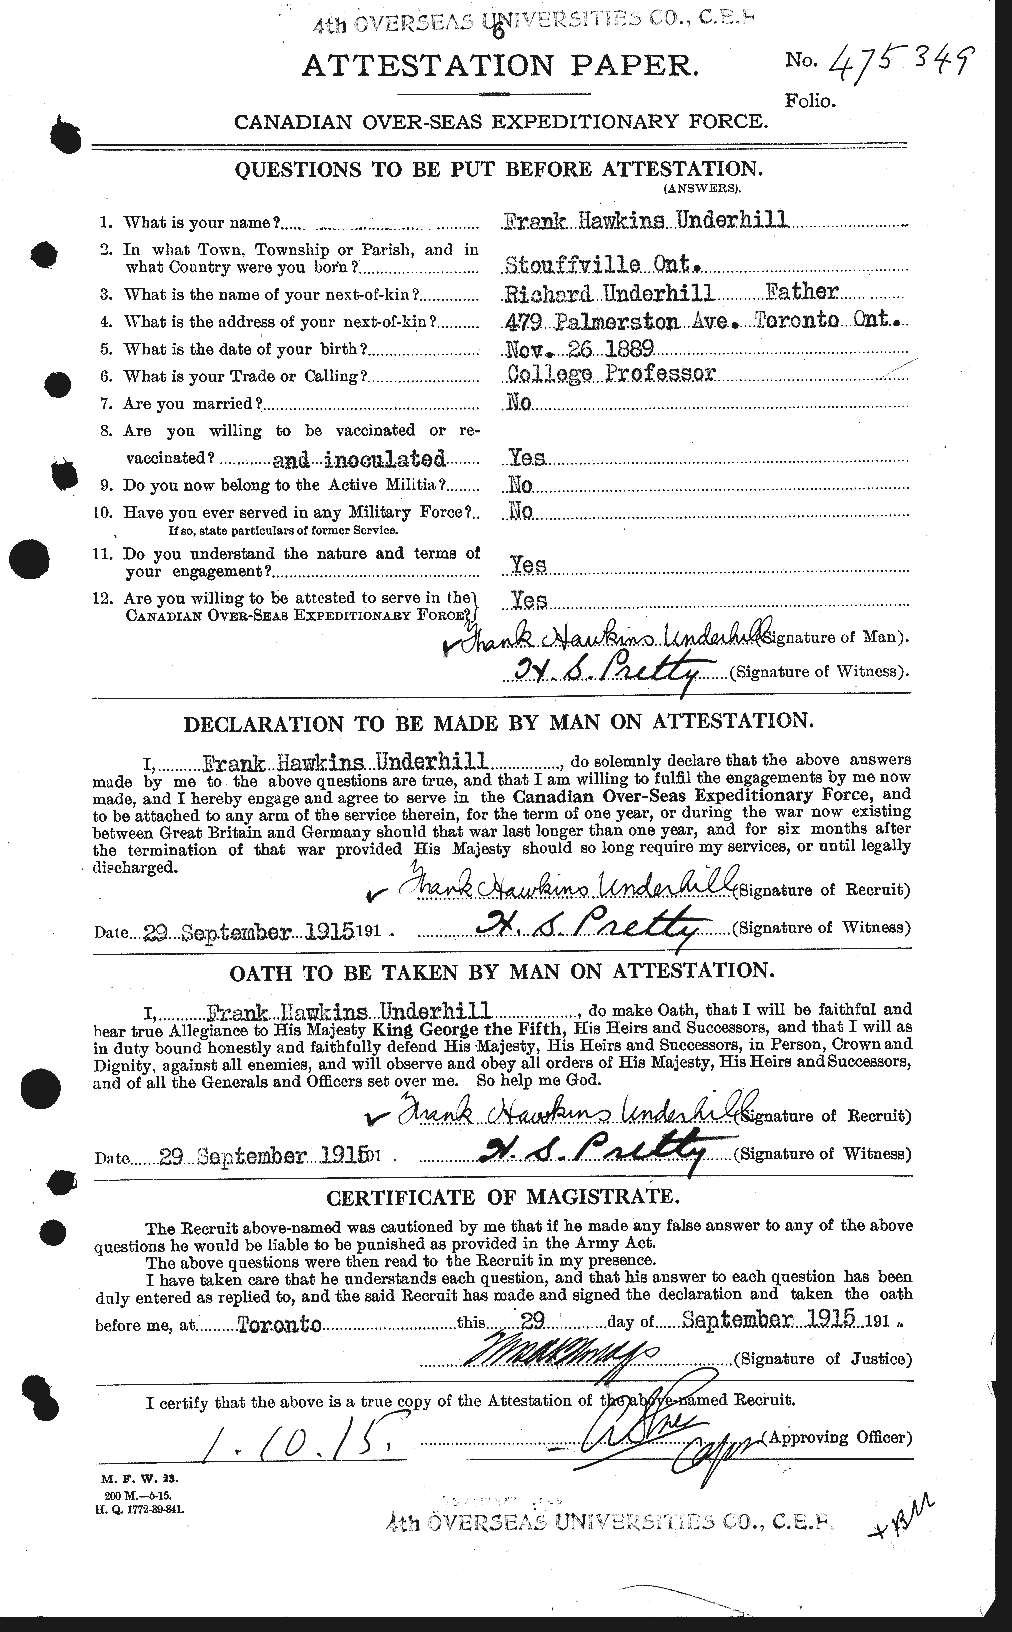 Personnel Records of the First World War - CEF 647085a